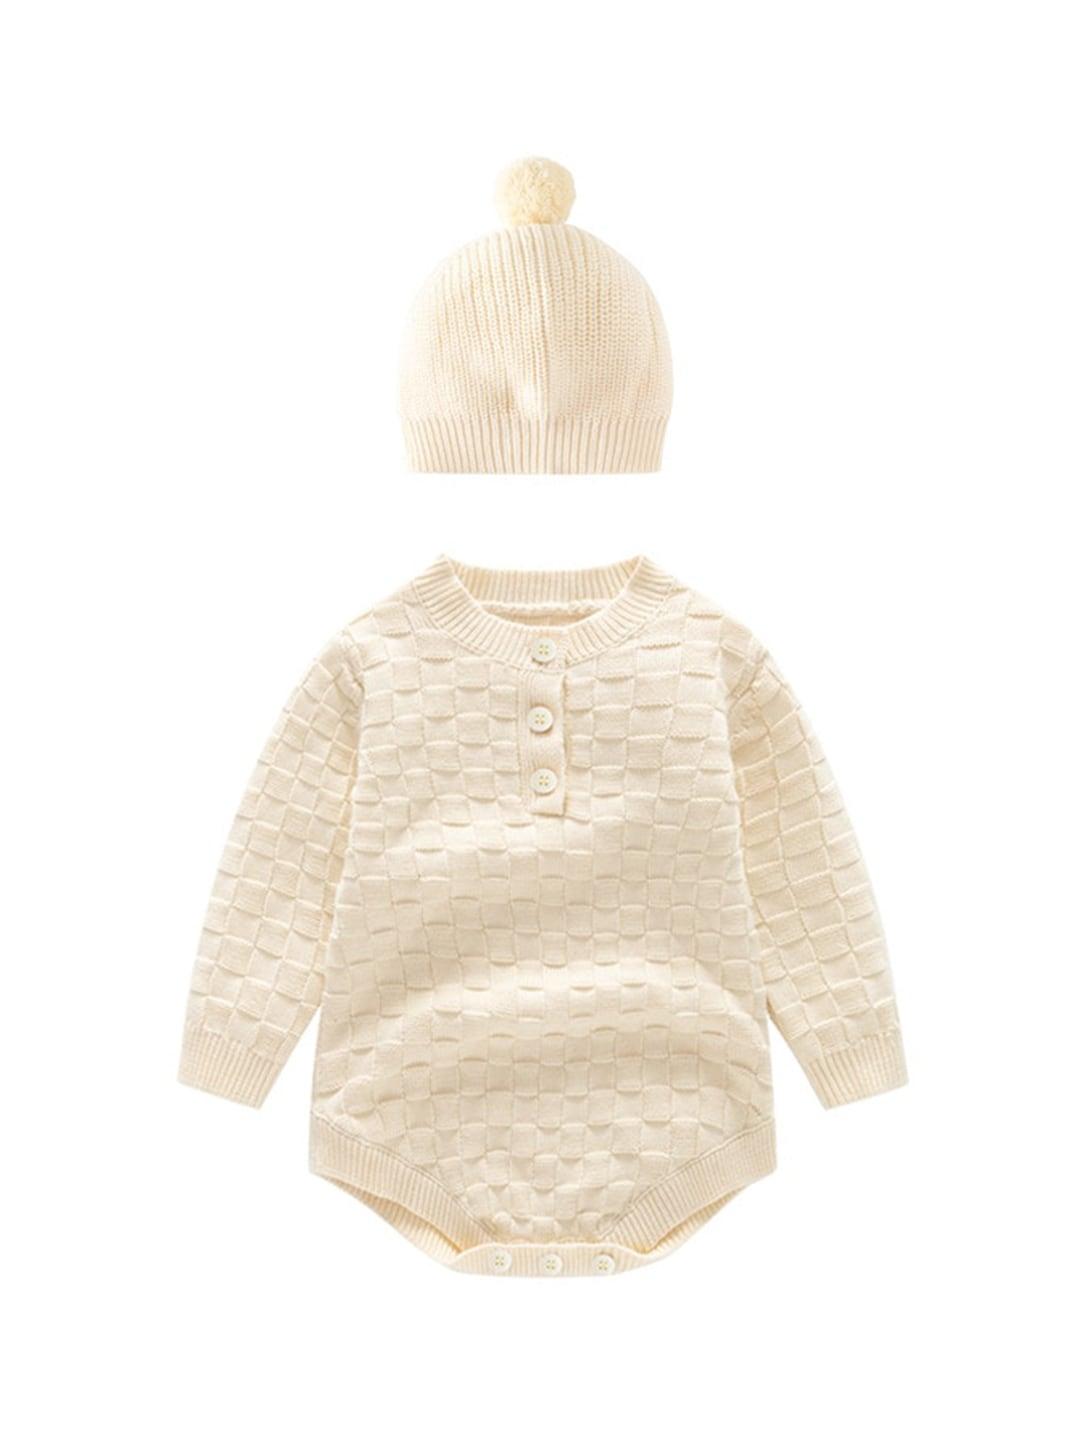 stylecast-off-white-infant-kids-knitted-cotton-rompers-with-beanie